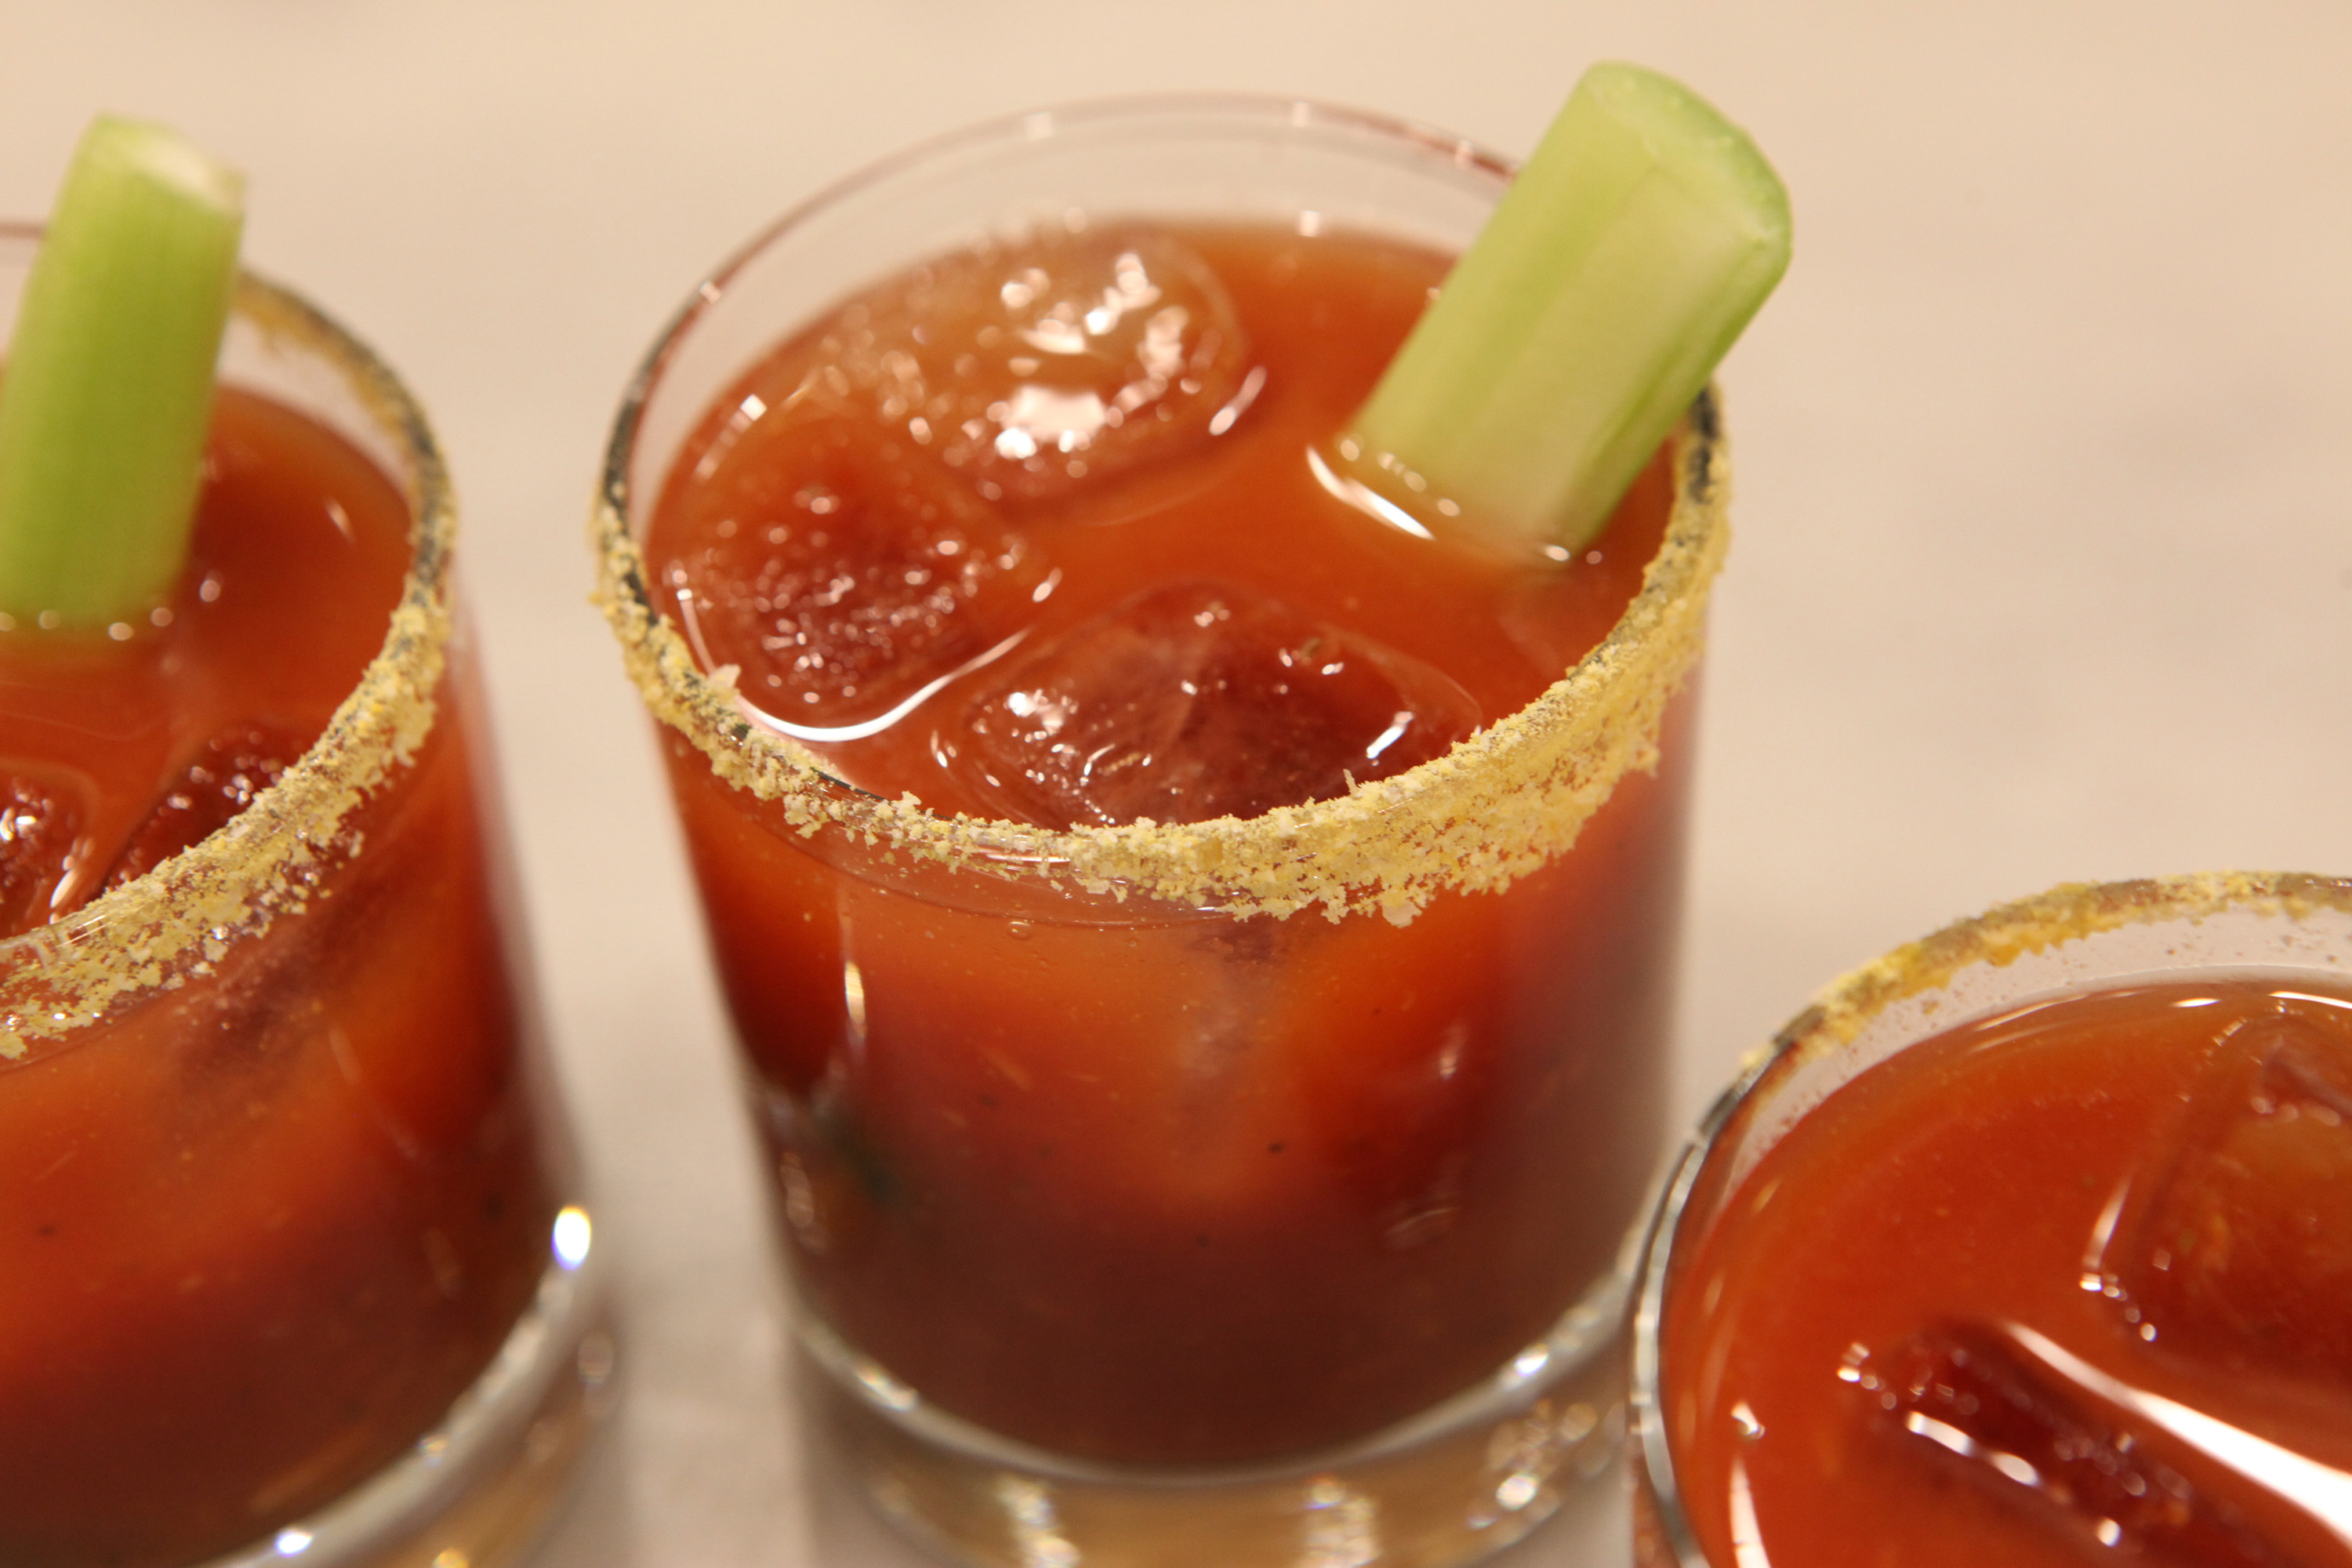 Colman’s Mustard Bloody Mary Cocktail Recipes with vodka.